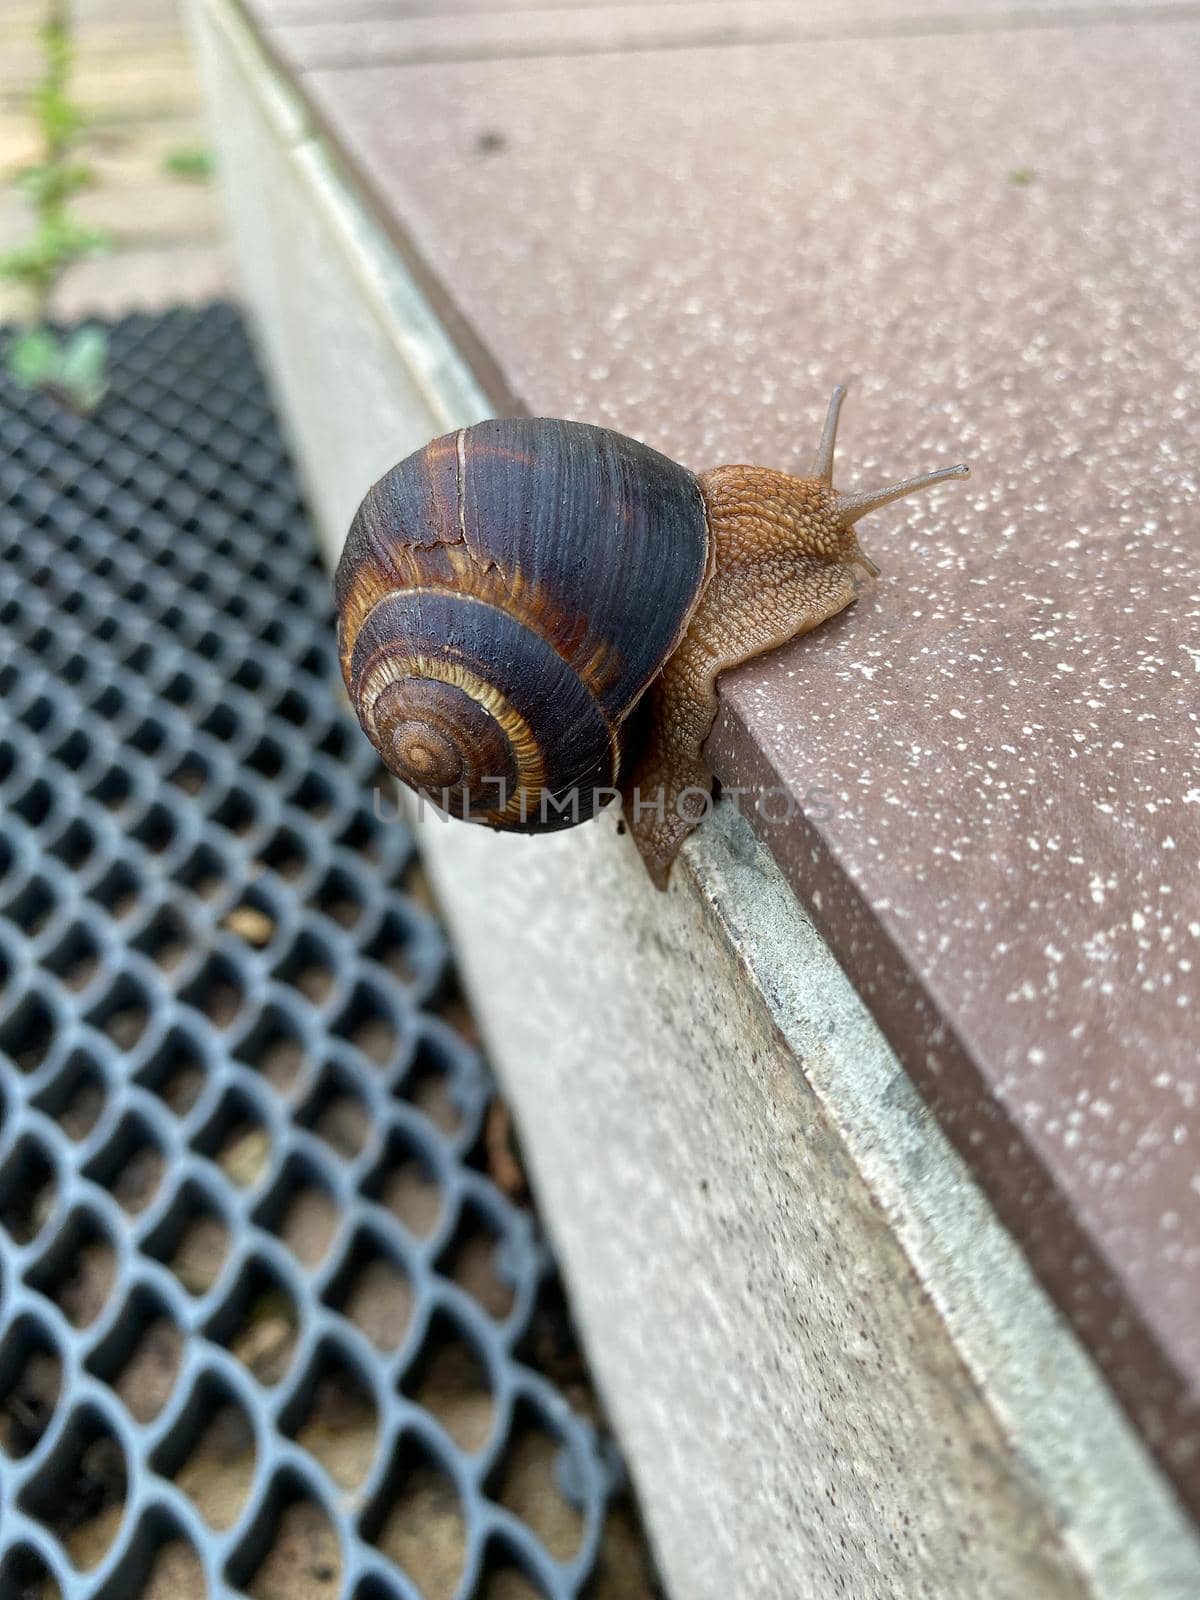 grape snail climbs up the steep rung of a staircase.